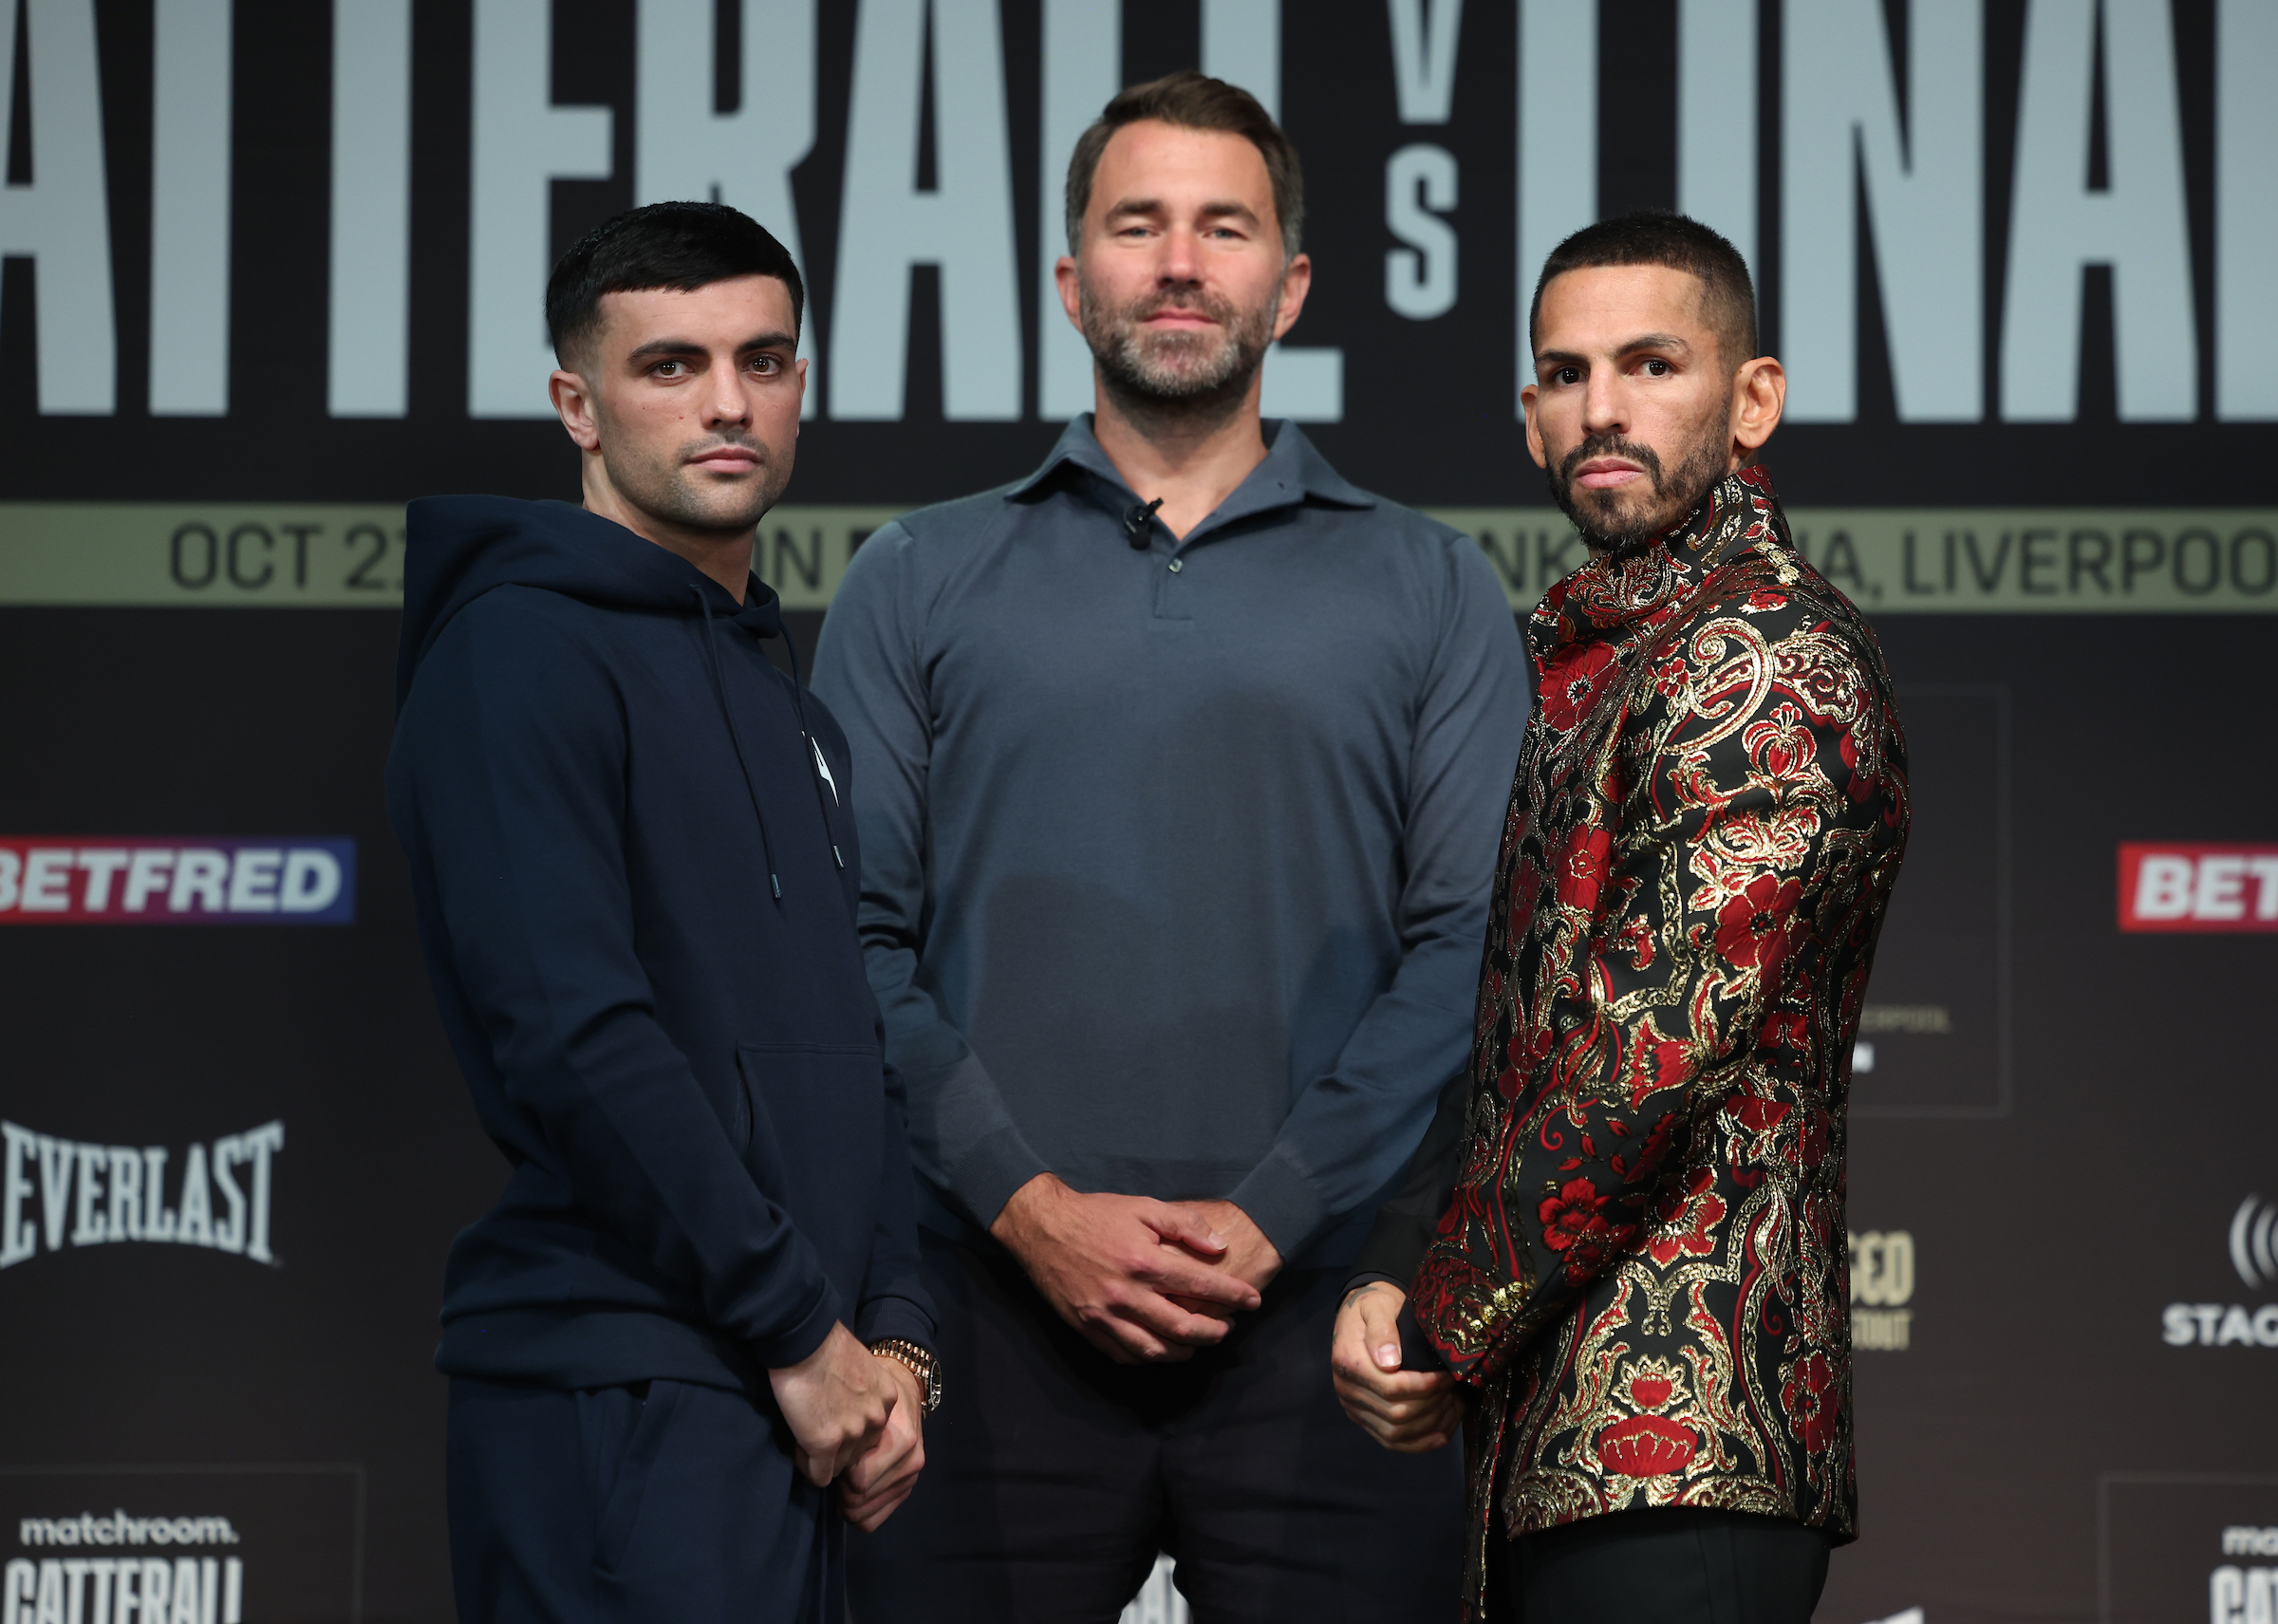 Catterall vs. Linares: Preview, Prediction & Betting Odds